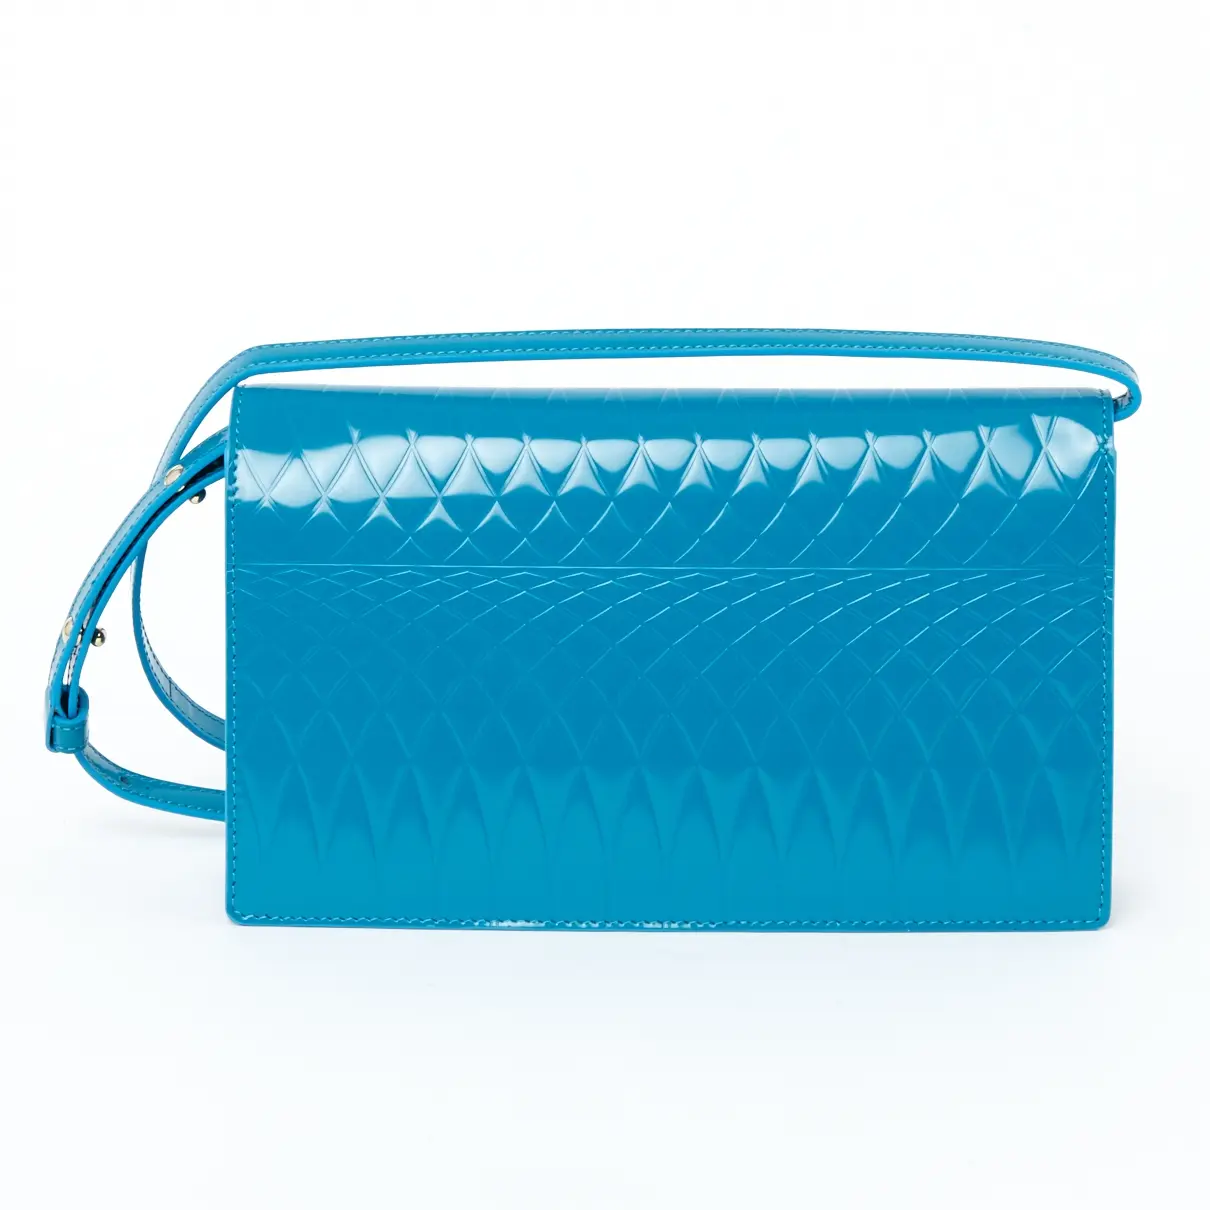 Buy Paul Smith LEATHER CLUTCH PURSE online